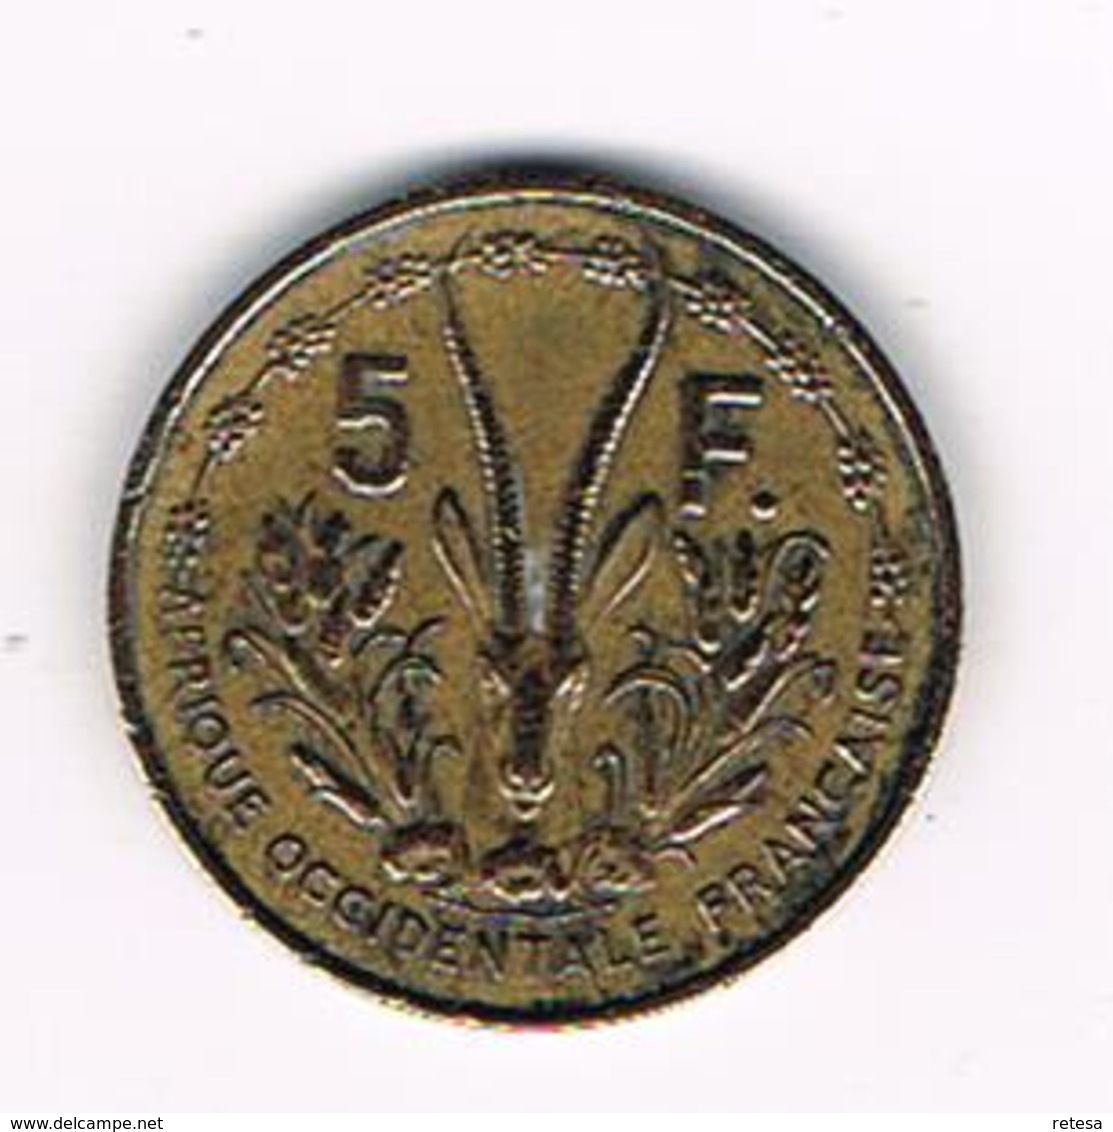 -&  FRENCH WEST AFRICA  5 FRANCS  1956 - Repubblica Centroafricana